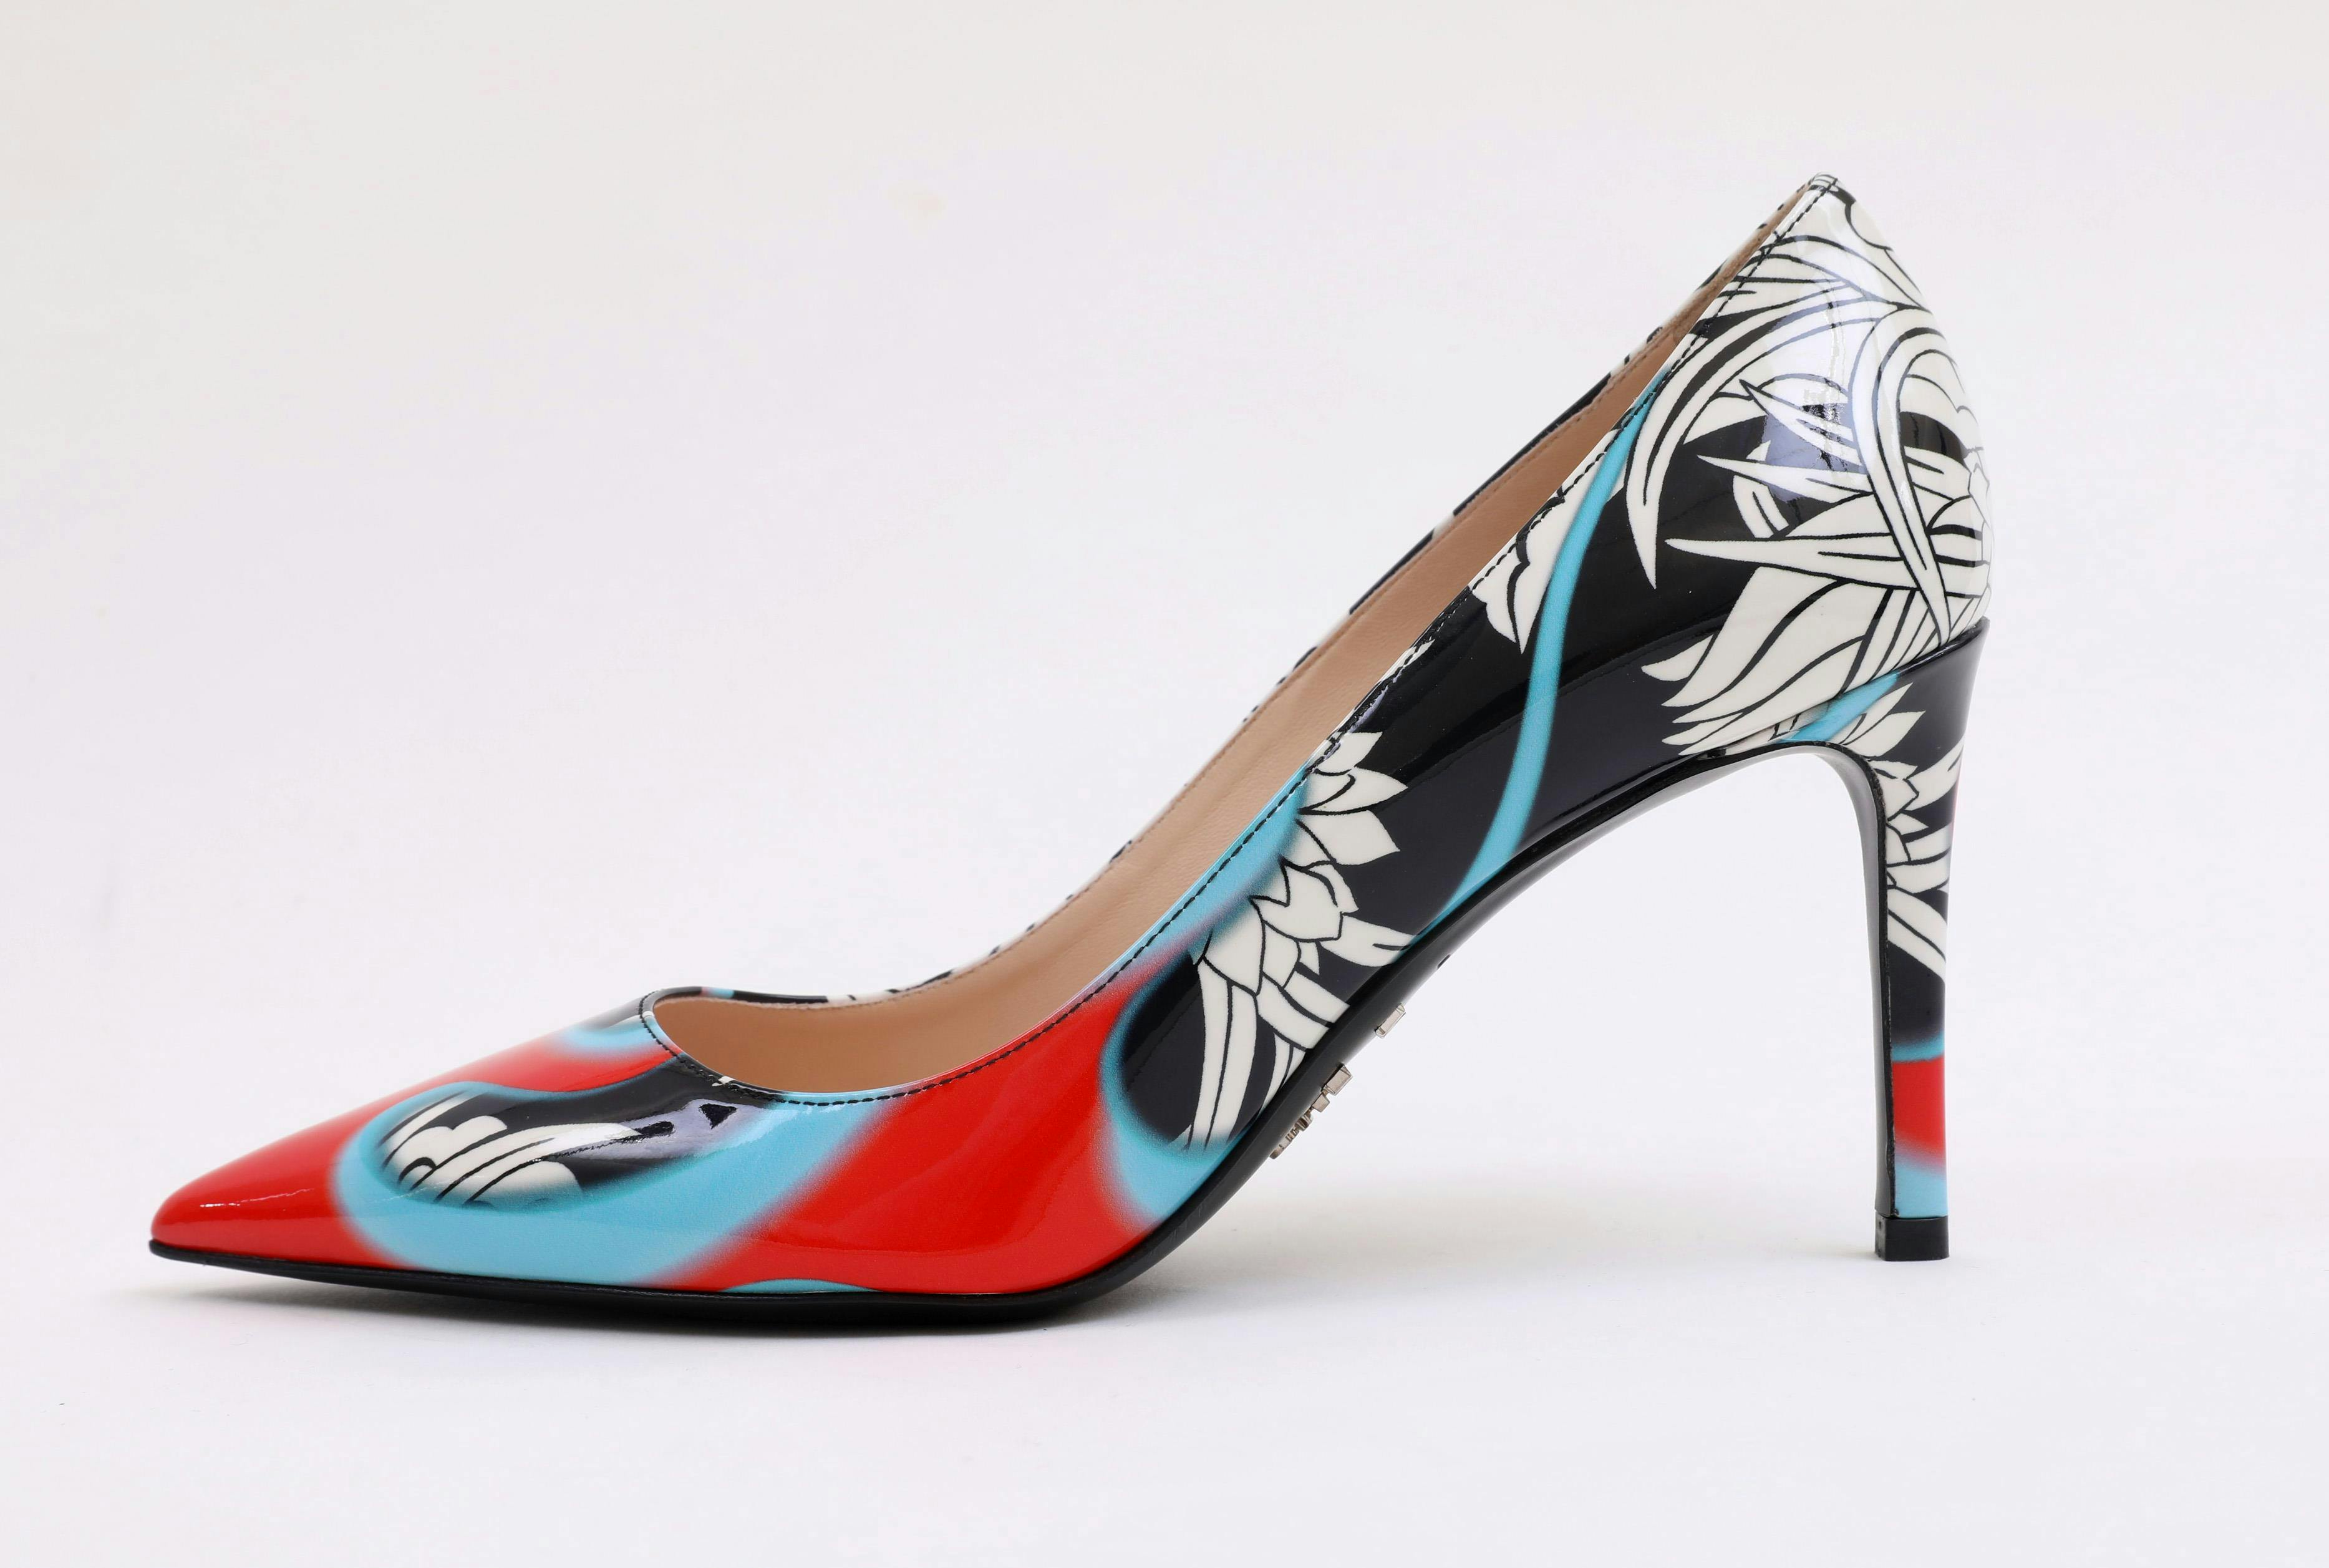 Prada: Made-to-Order, Made-to-Wear Shoes